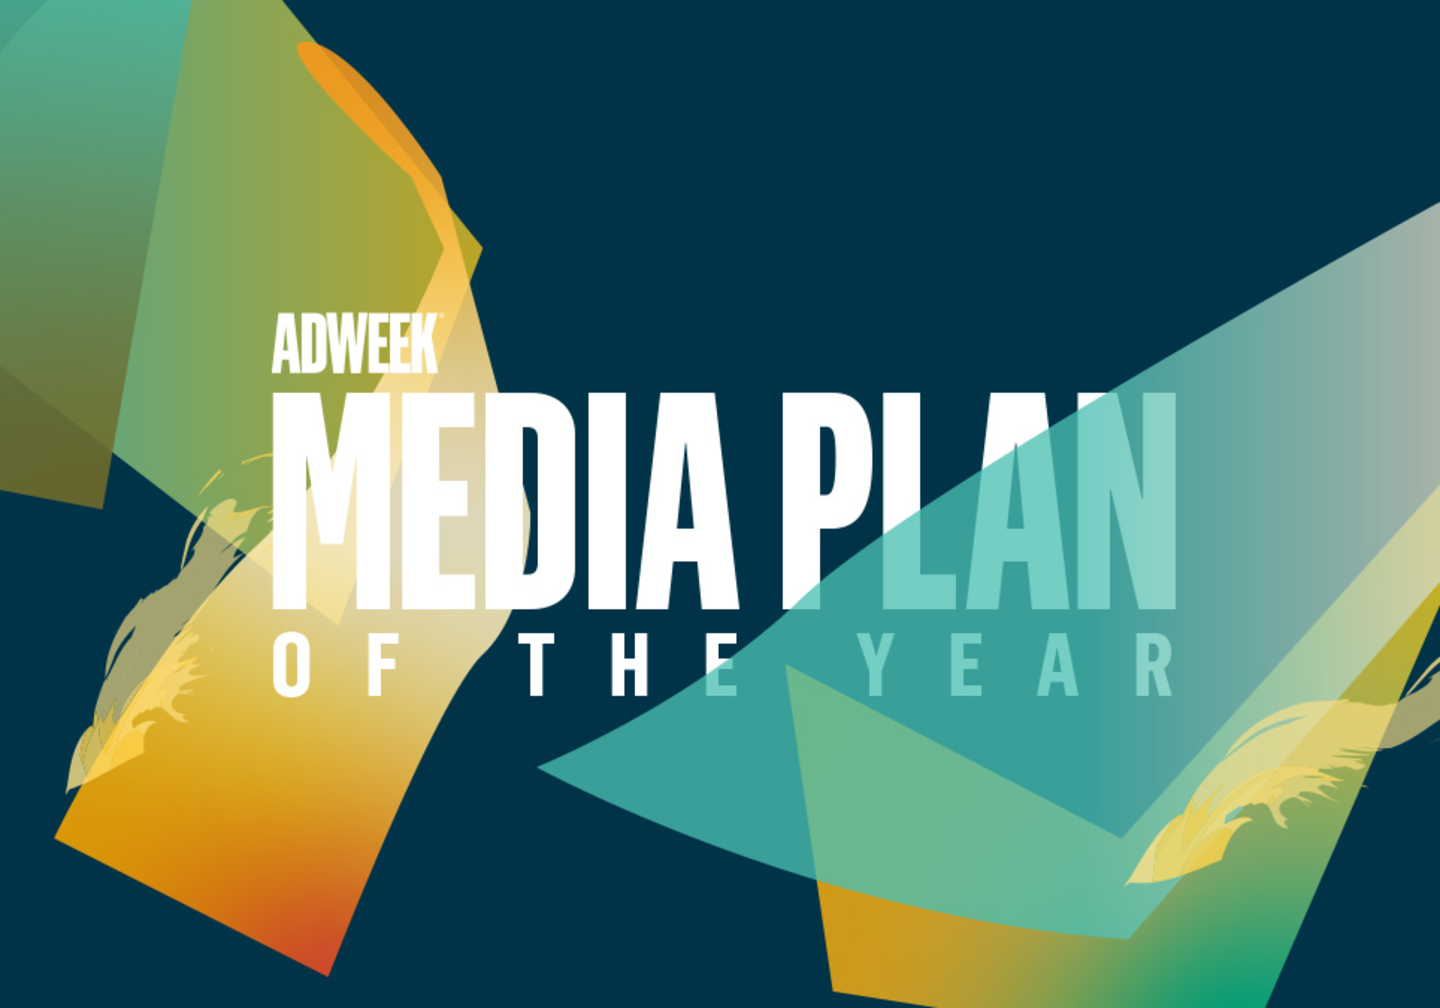 Adweek media plan of the year graphic